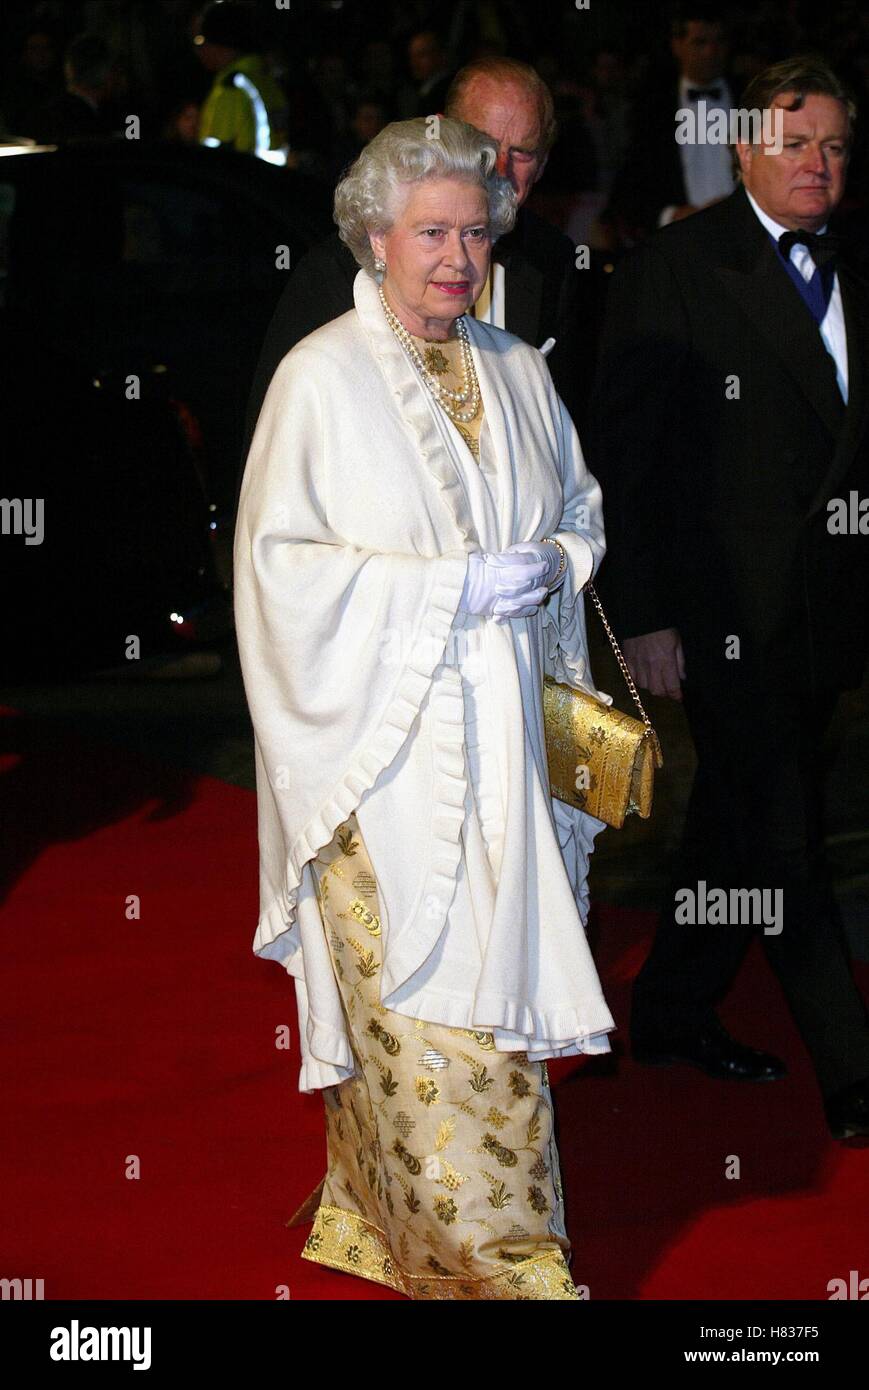 HER MAJESTY QUEEN ELIZABETH II DIE ANOTHER DAY (JAMES BOND) PREMIERE LONDON ROYAL ALBERT HALL LONDON ENGLAND 18 November 200 Stock Photo